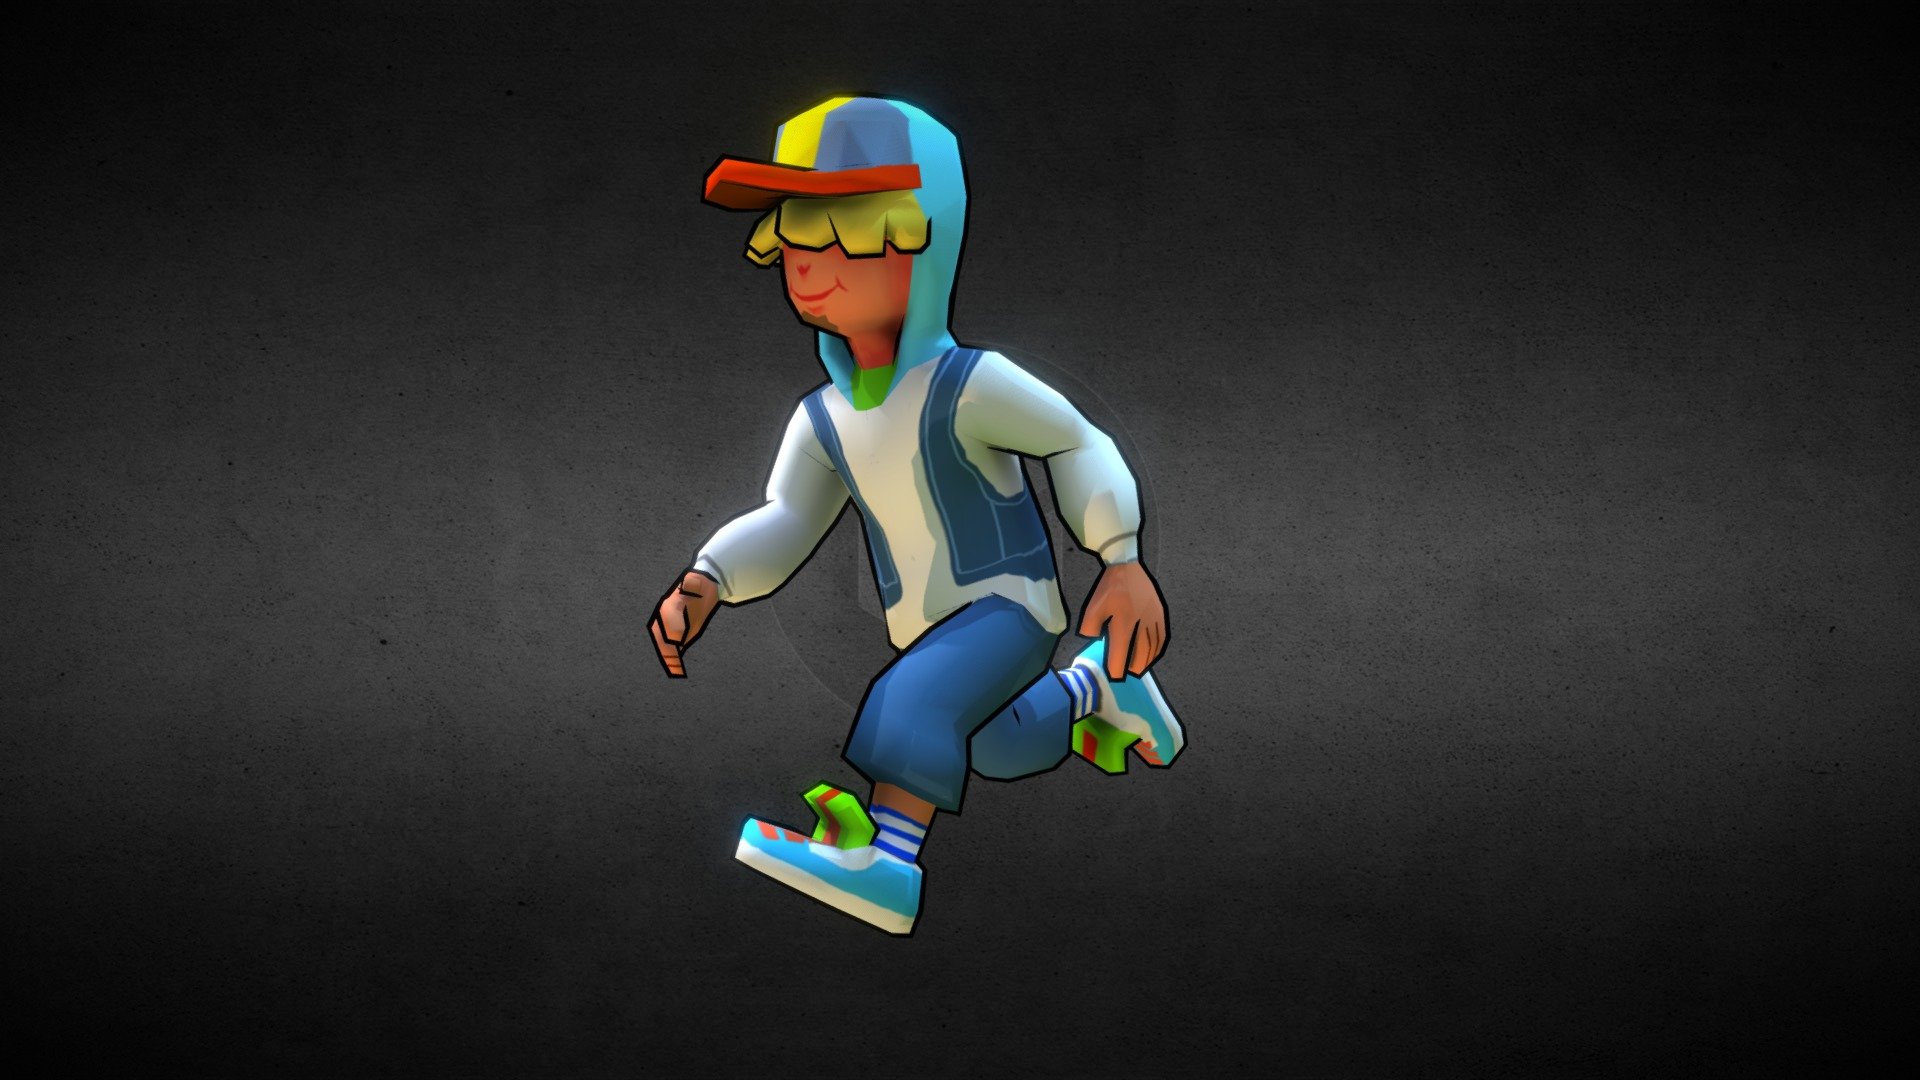 Subway Surfers - New Characters, Locations, Items, and More